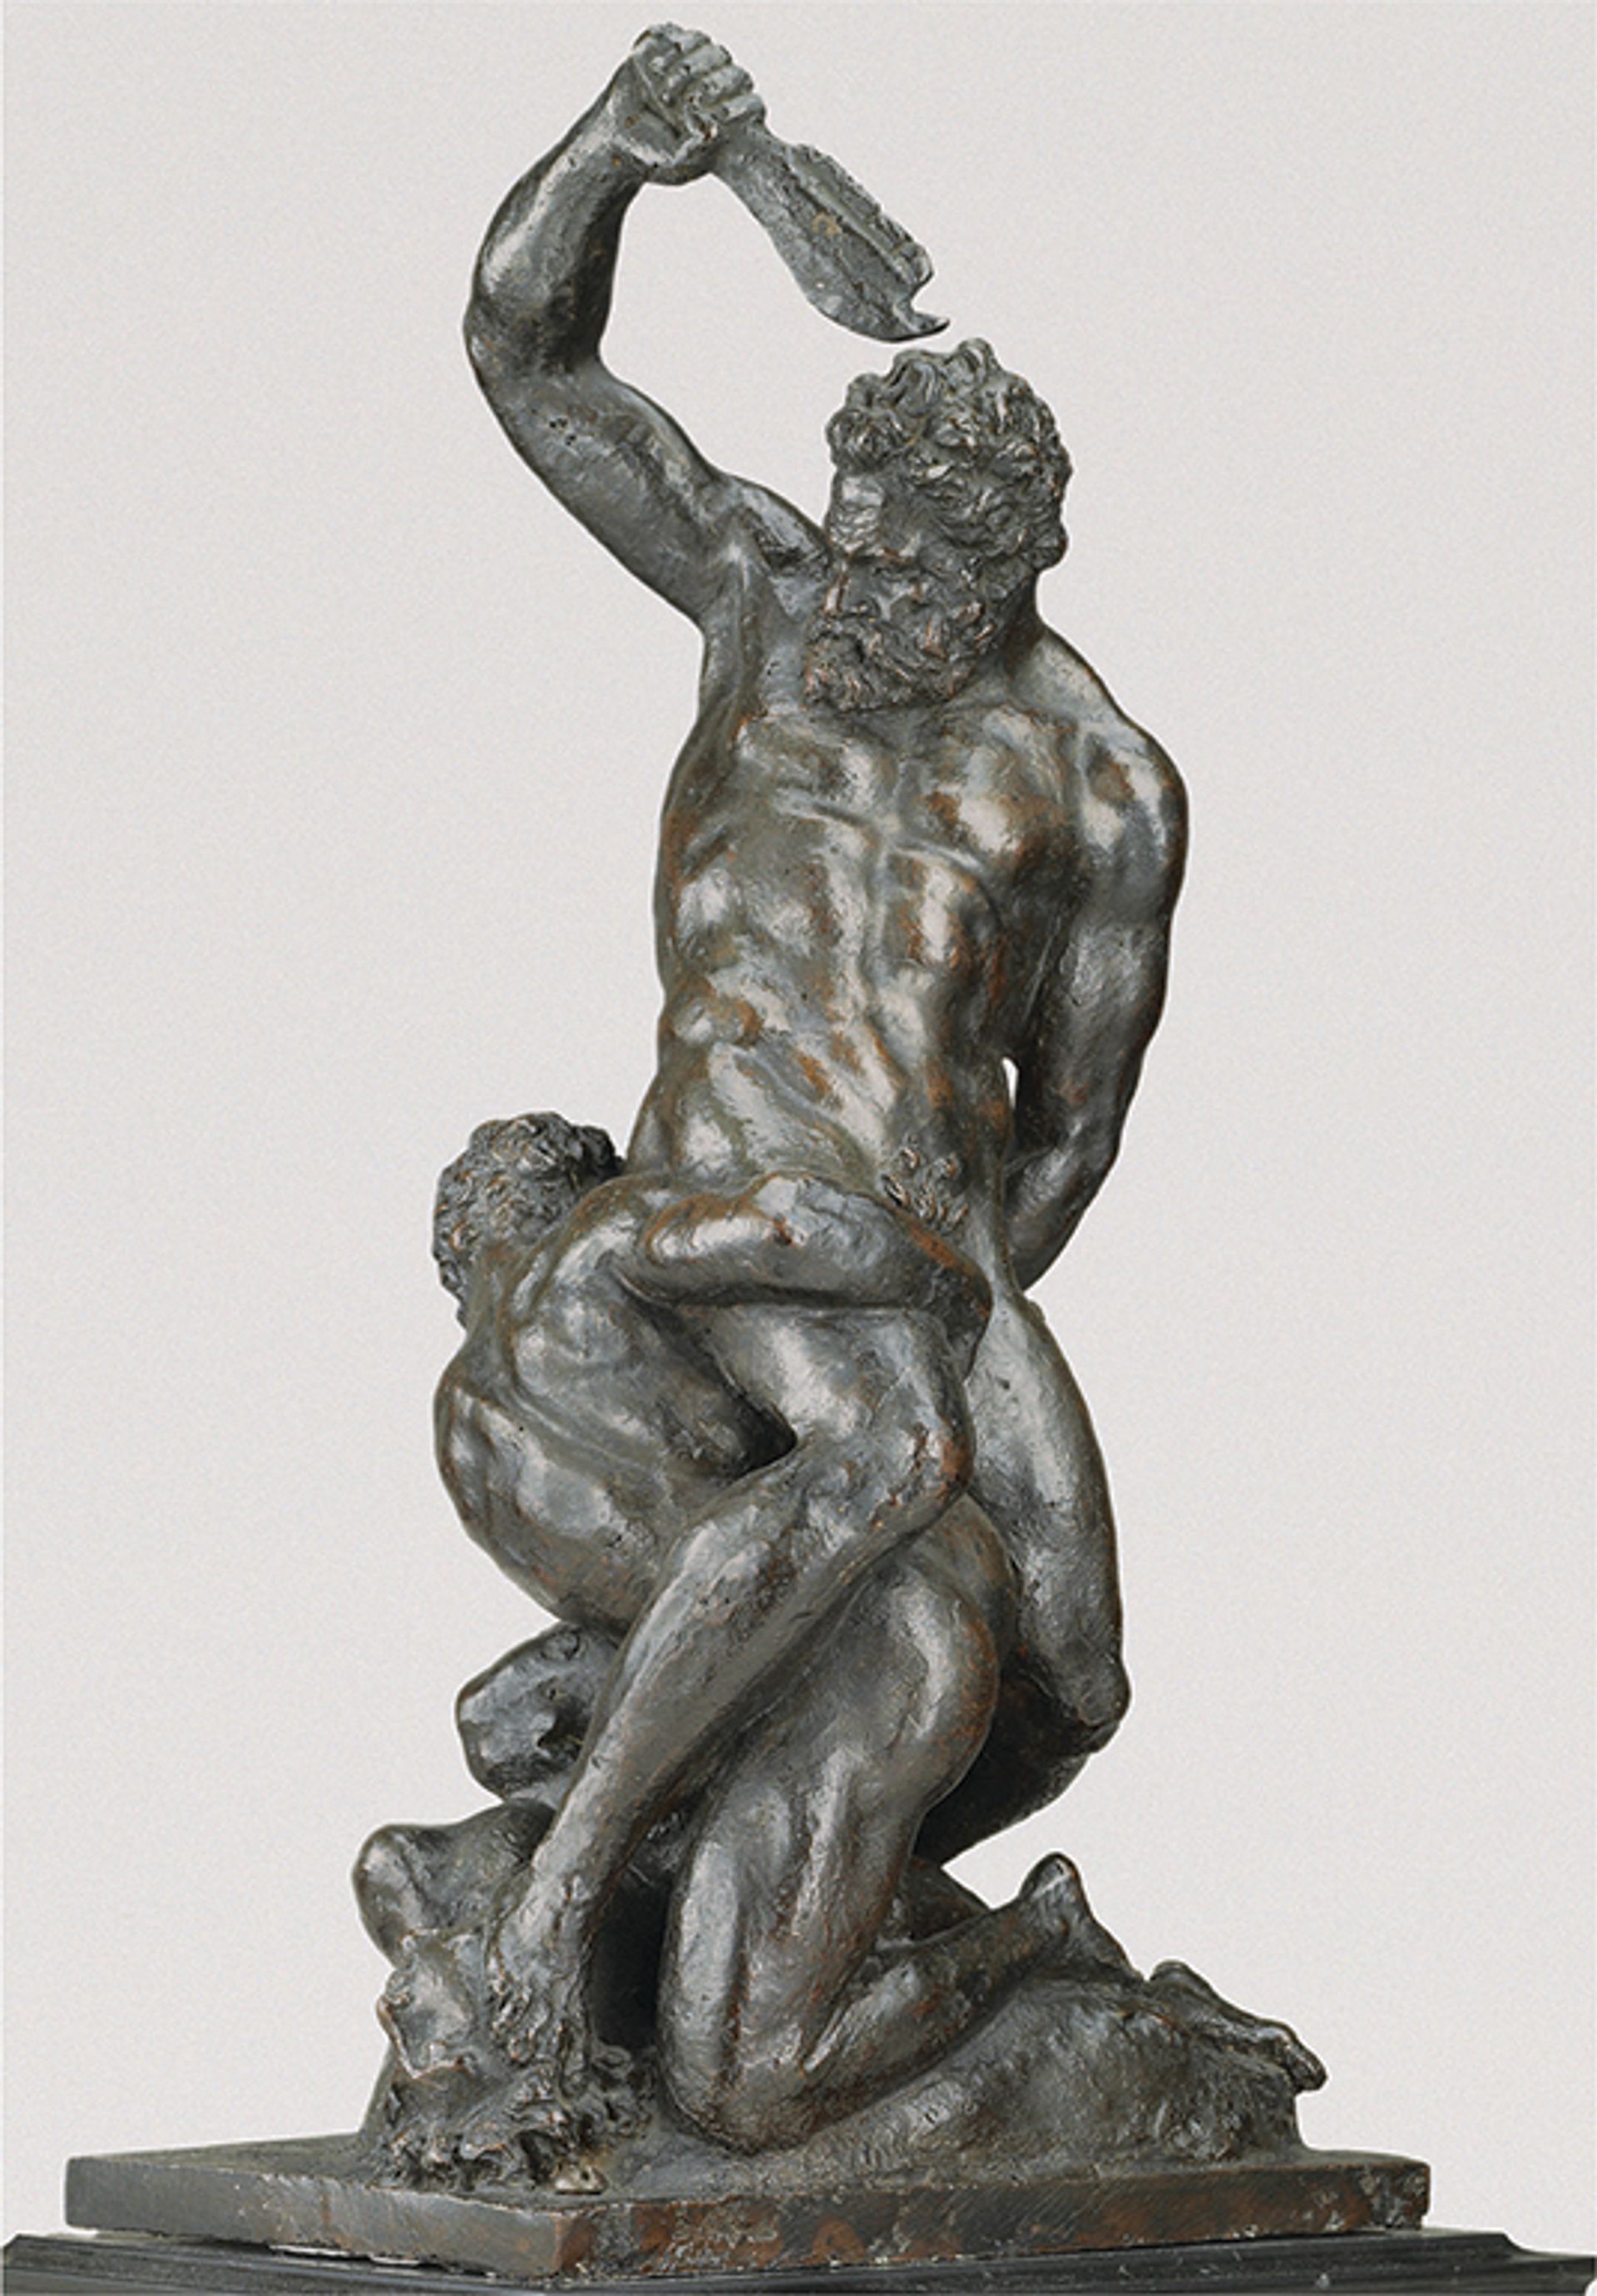 Bronze as a way of preserving original works: After Michelangelo, Samson and Two Philistines, a 16th-century cast from a lost model (around 1528-31) by Michelangelo Courtesy of the Frick Collection, New York